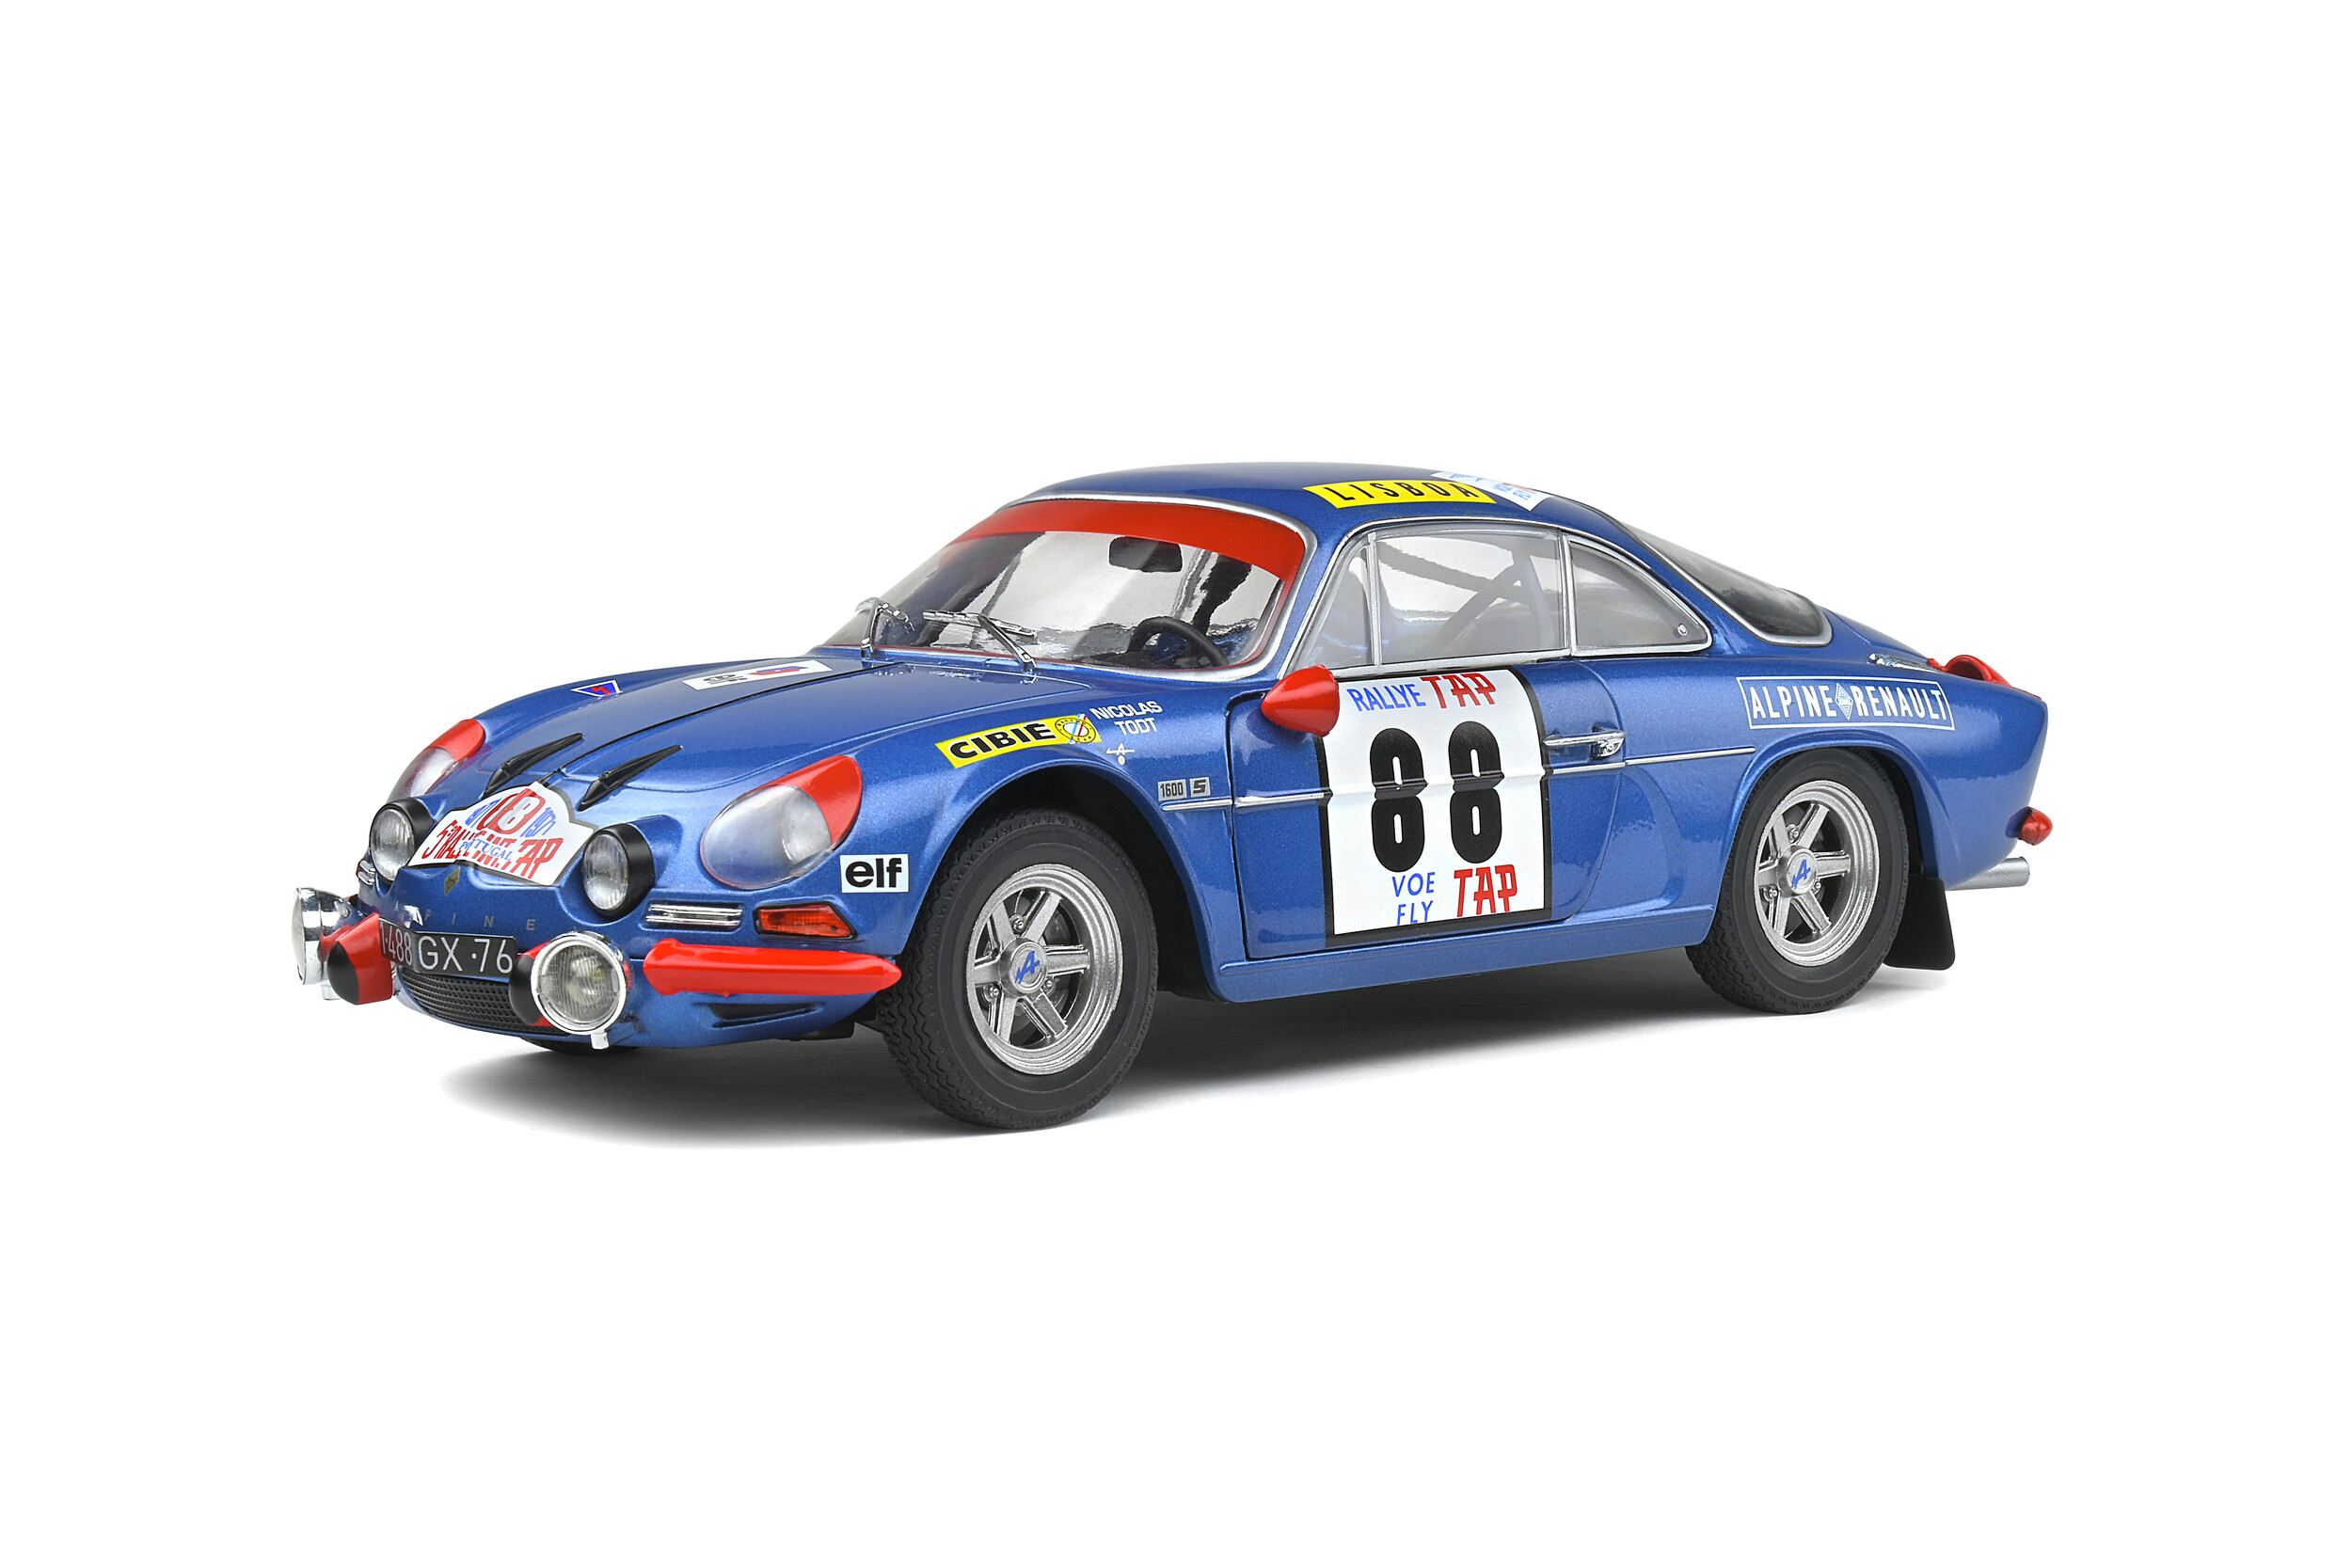 ALPINE A110 1600S #88 WINNER PORTUGAL RALLY 1971 1/18 DIECAST BY SOLIDO  S1804202